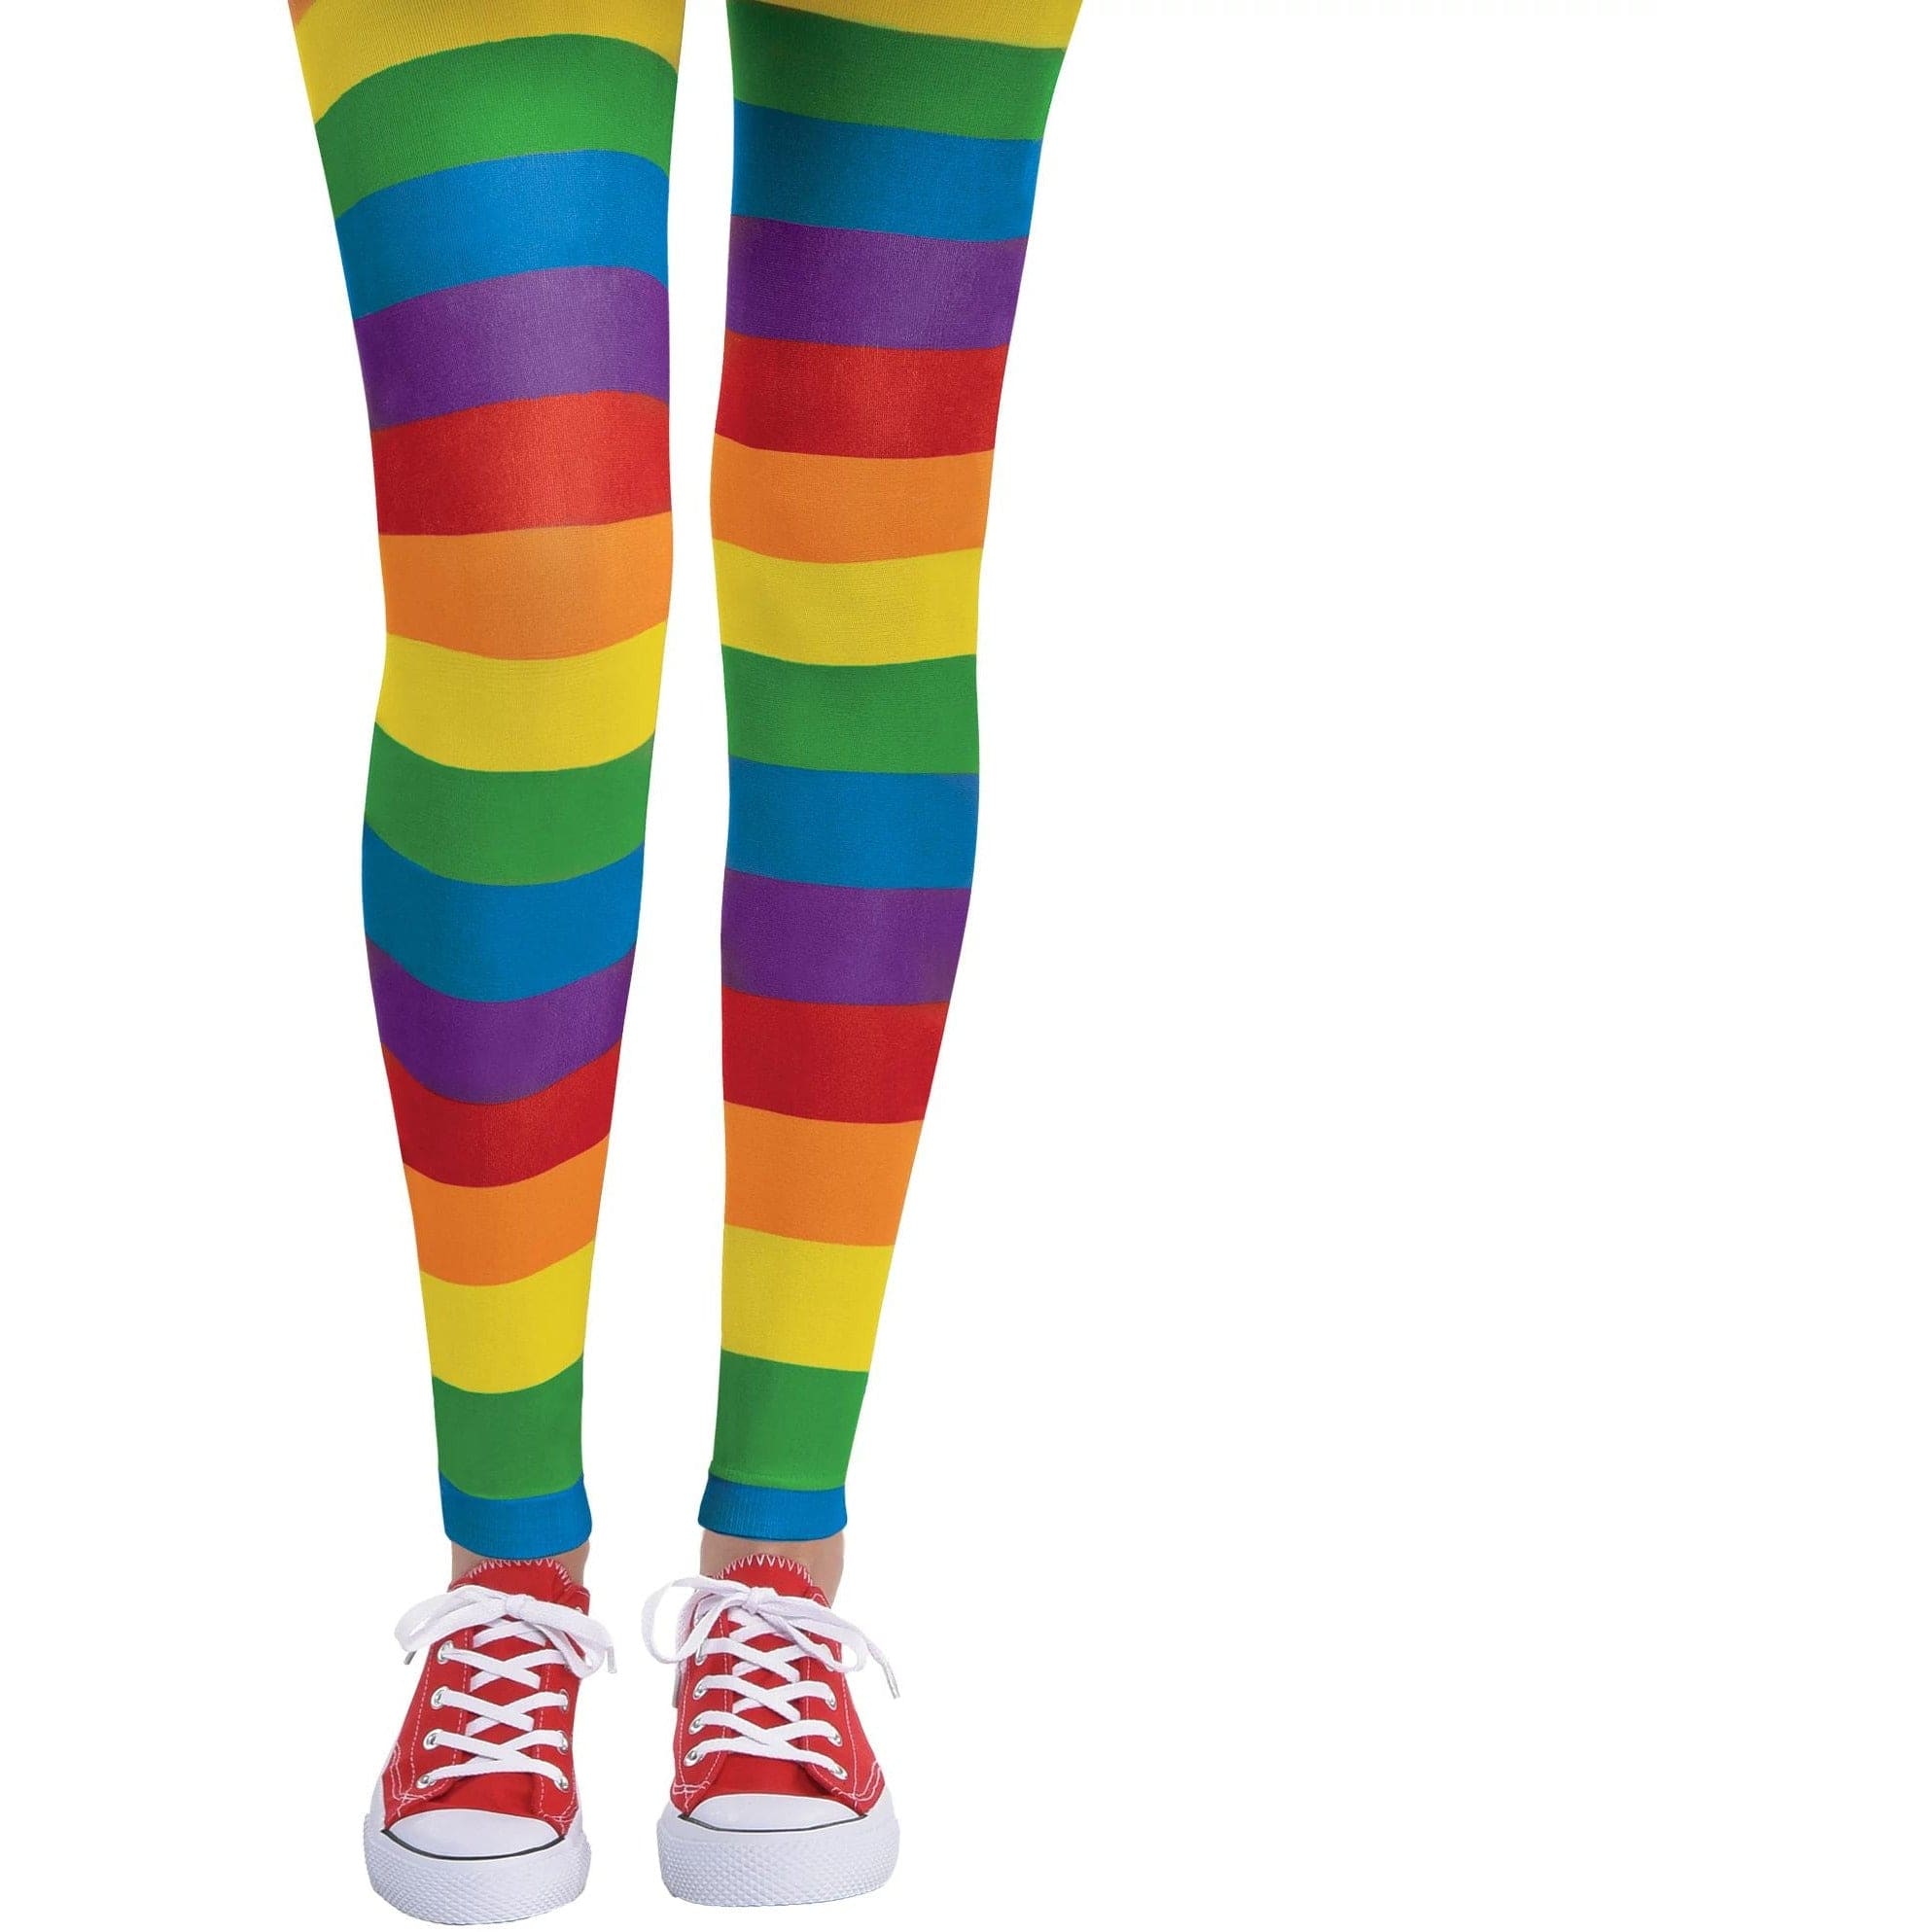 Amscan COSTUMES: ACCESSORIES Adult Standard Rainbow Footless Tights